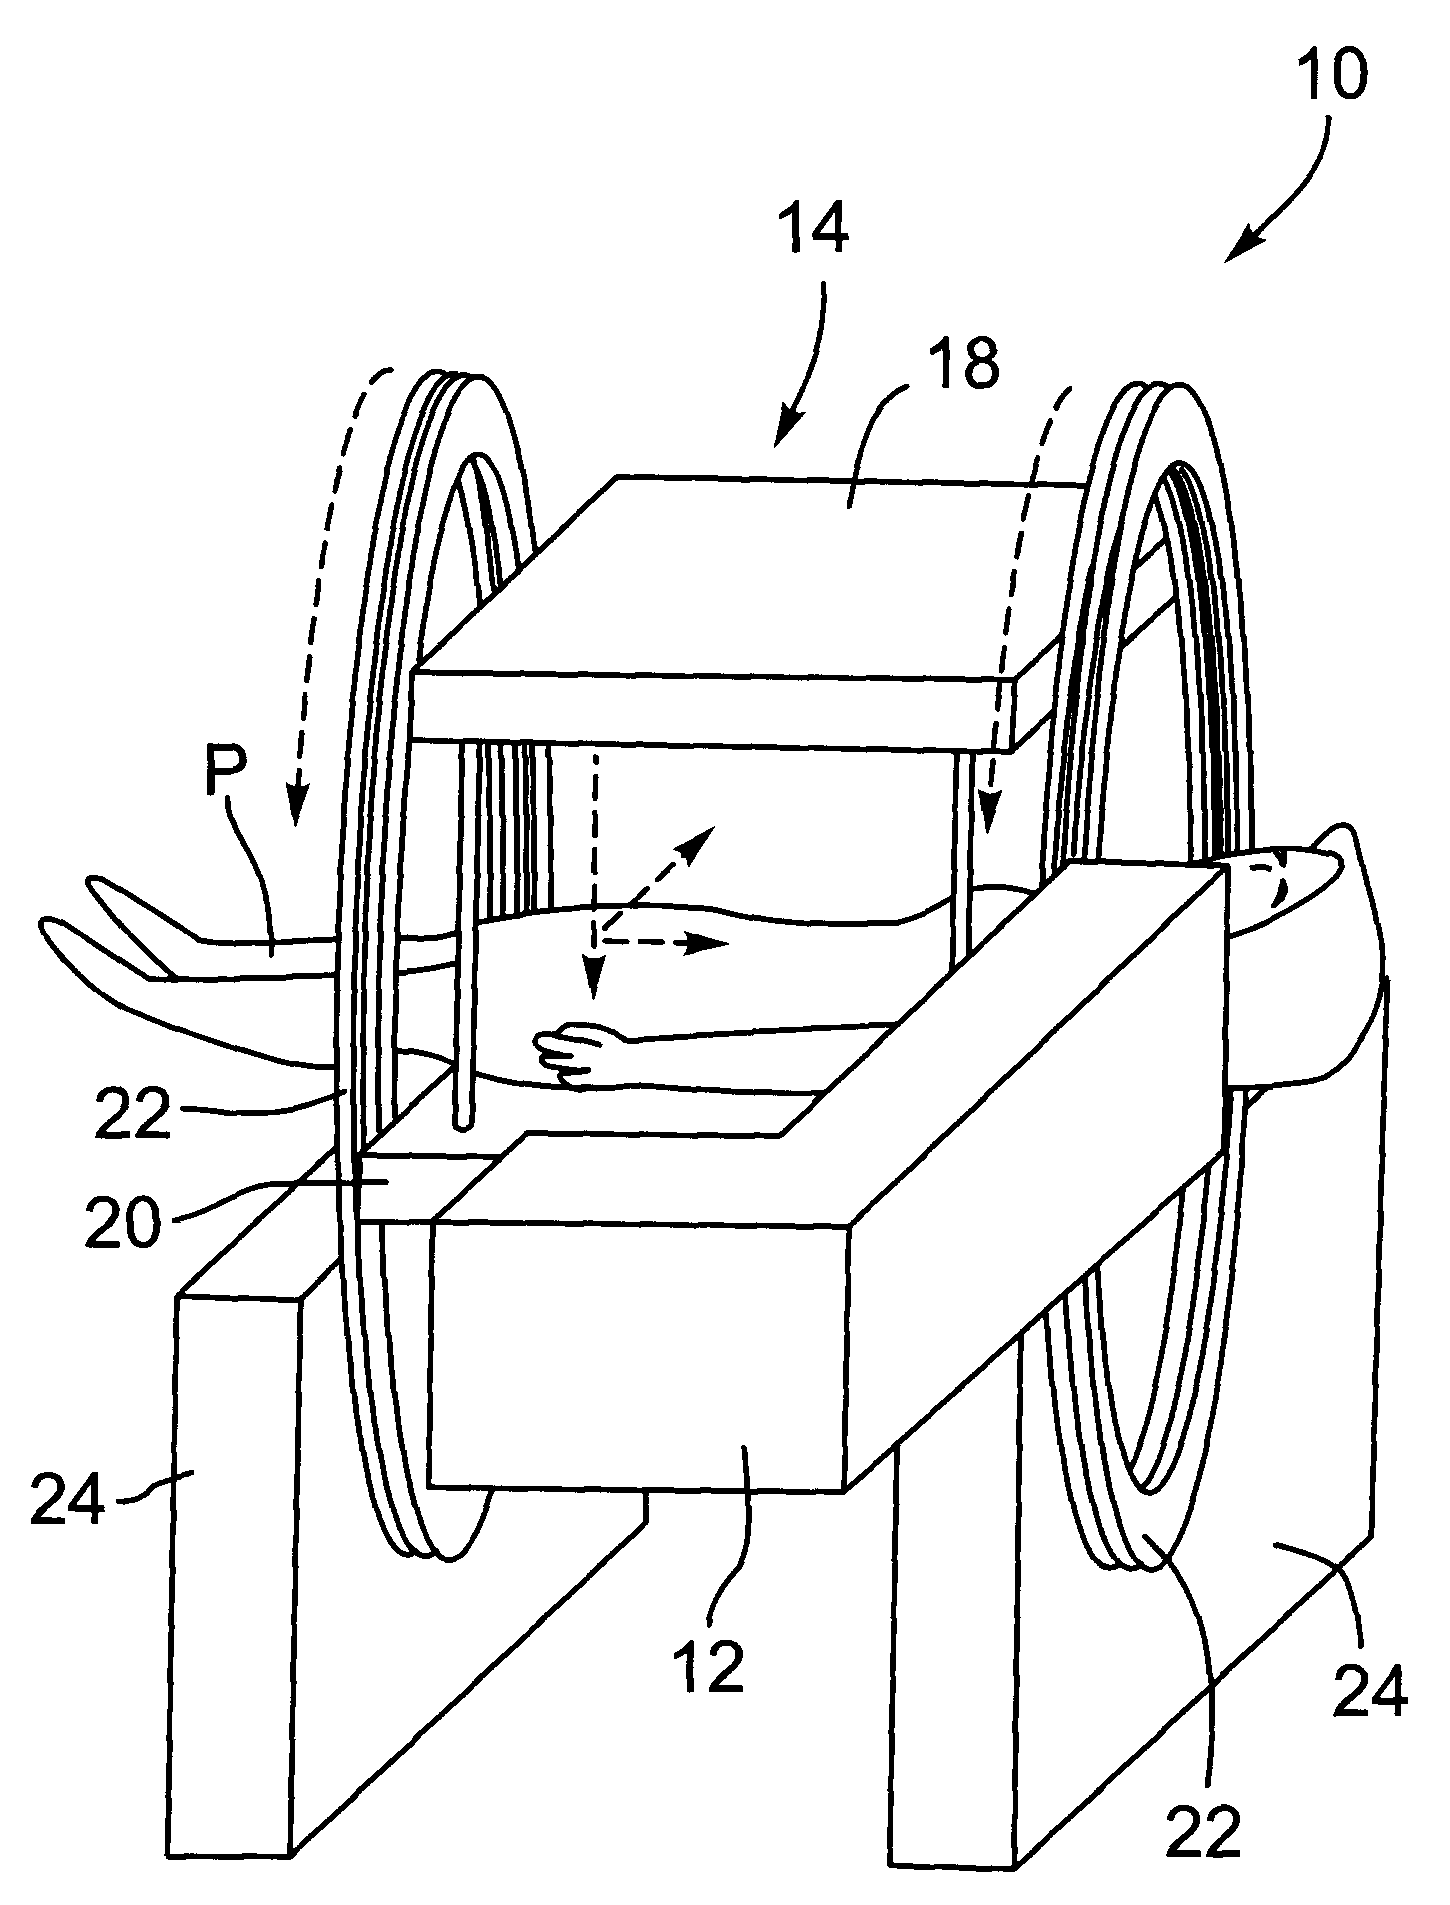 Integrated external beam radiotherapy and MRI system